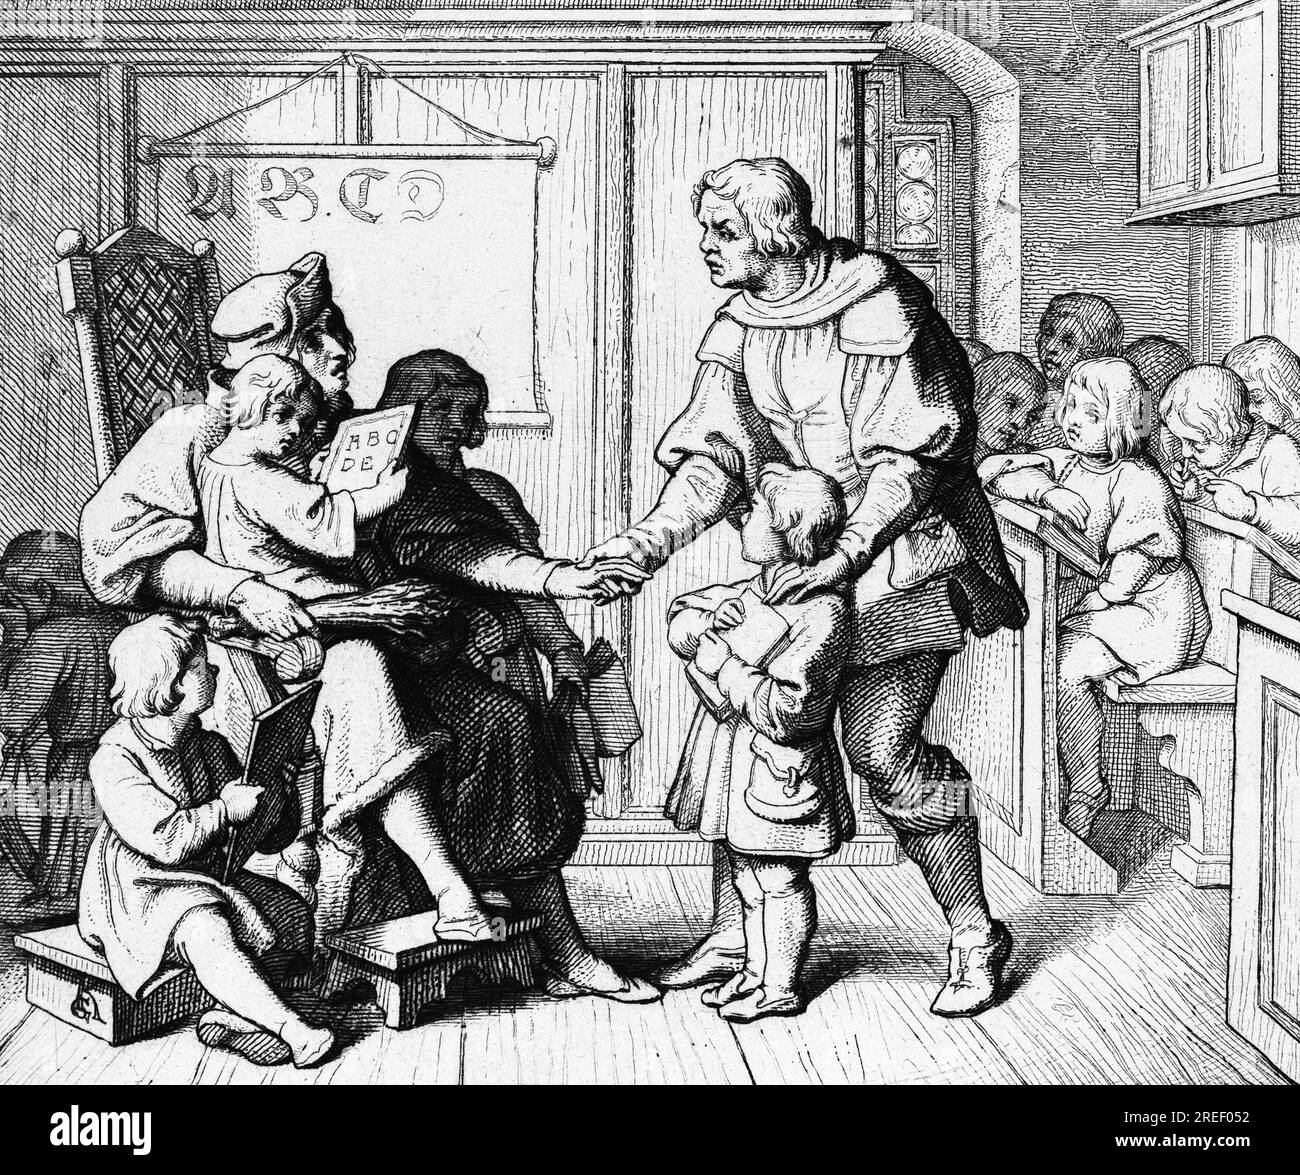 Martin Luther being led to school, Germany, room, teacher, children, school desk, sitting, father, 15th century, historical illustration c. 1860 Stock Photo